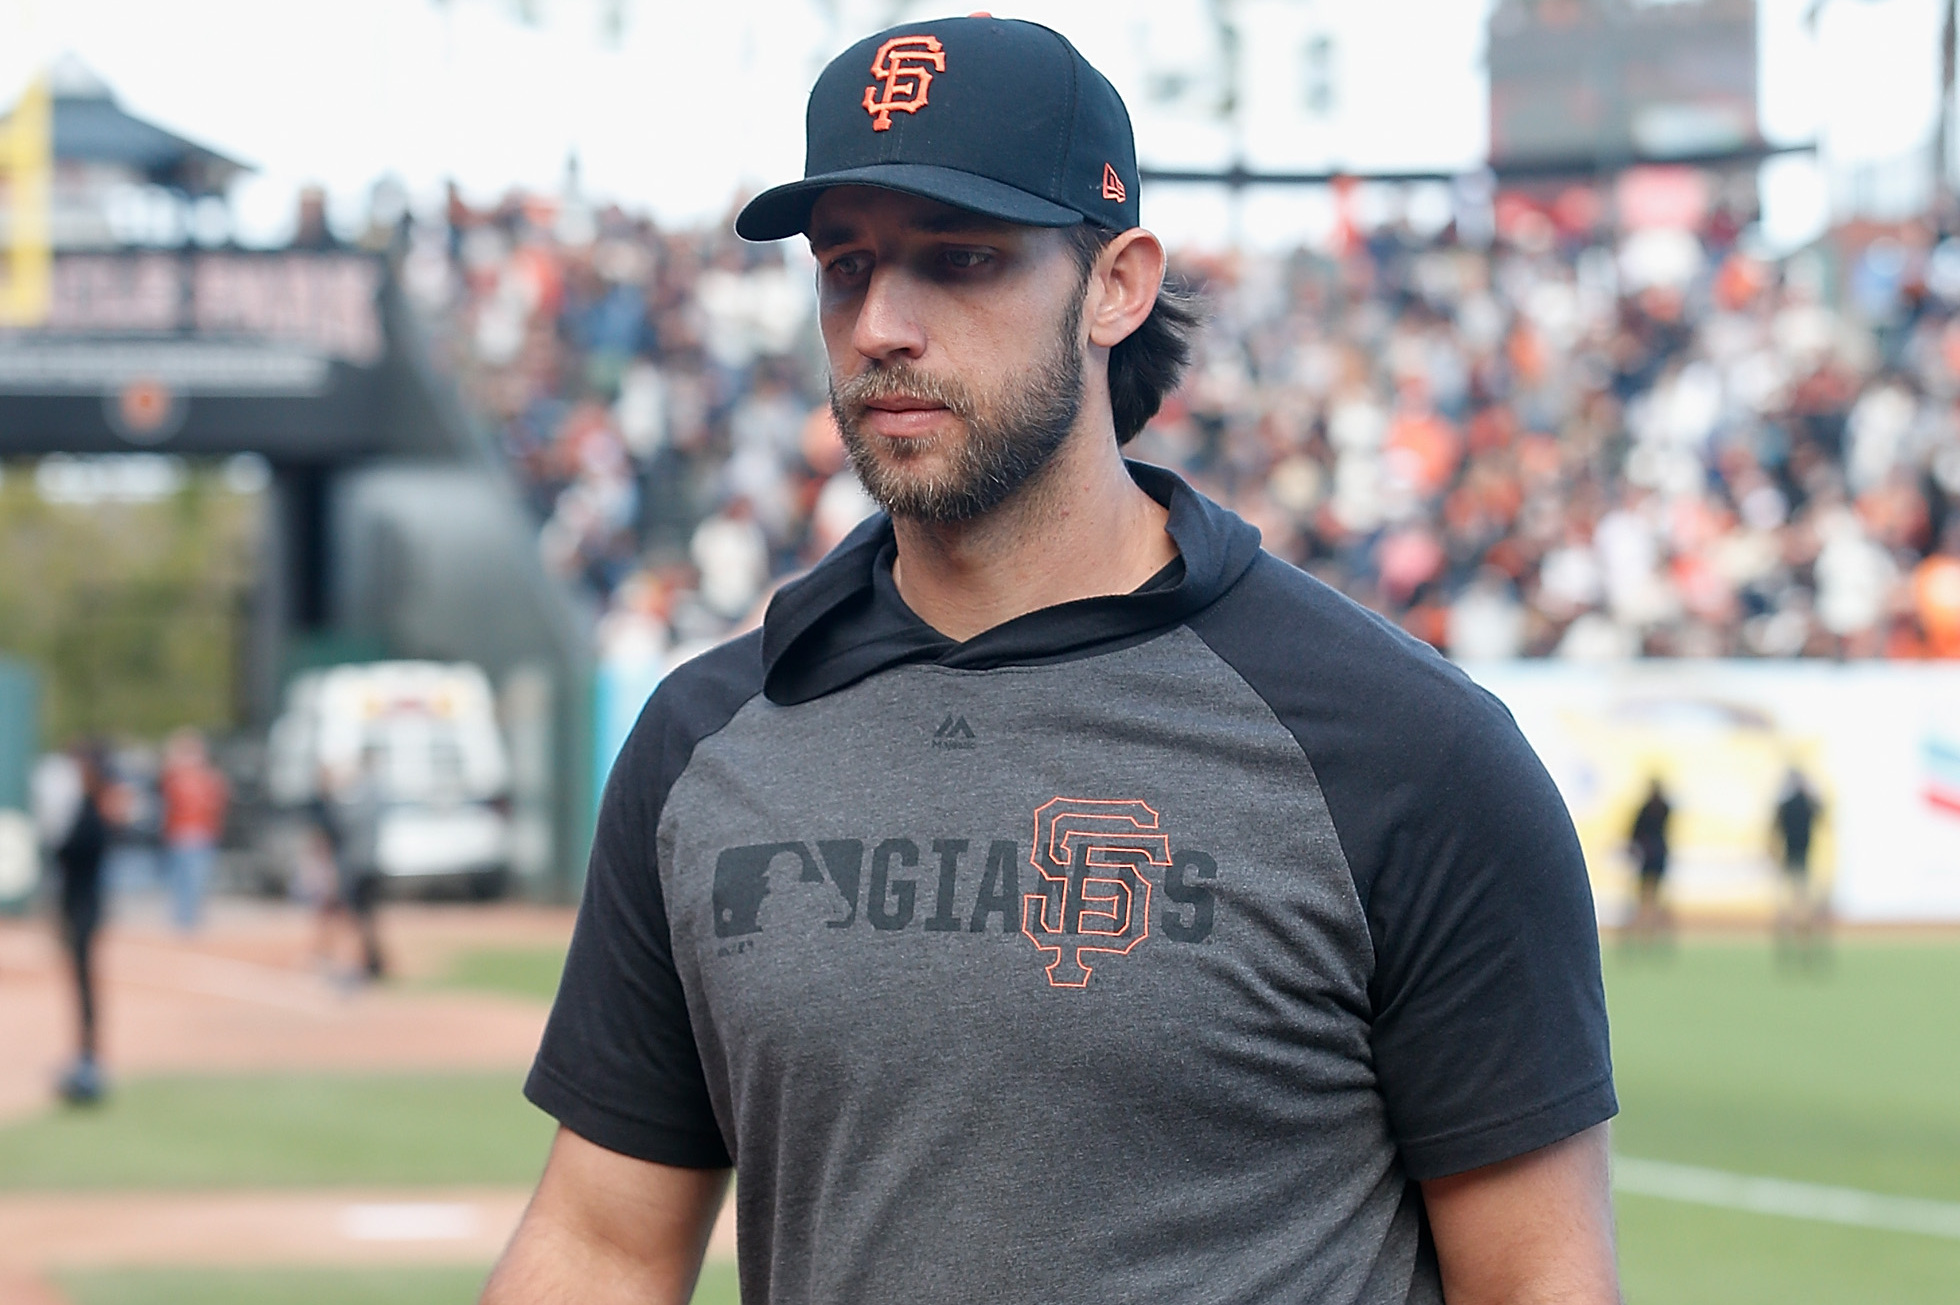 Madison Bumgarner receives qualifying offer from Giants - The San